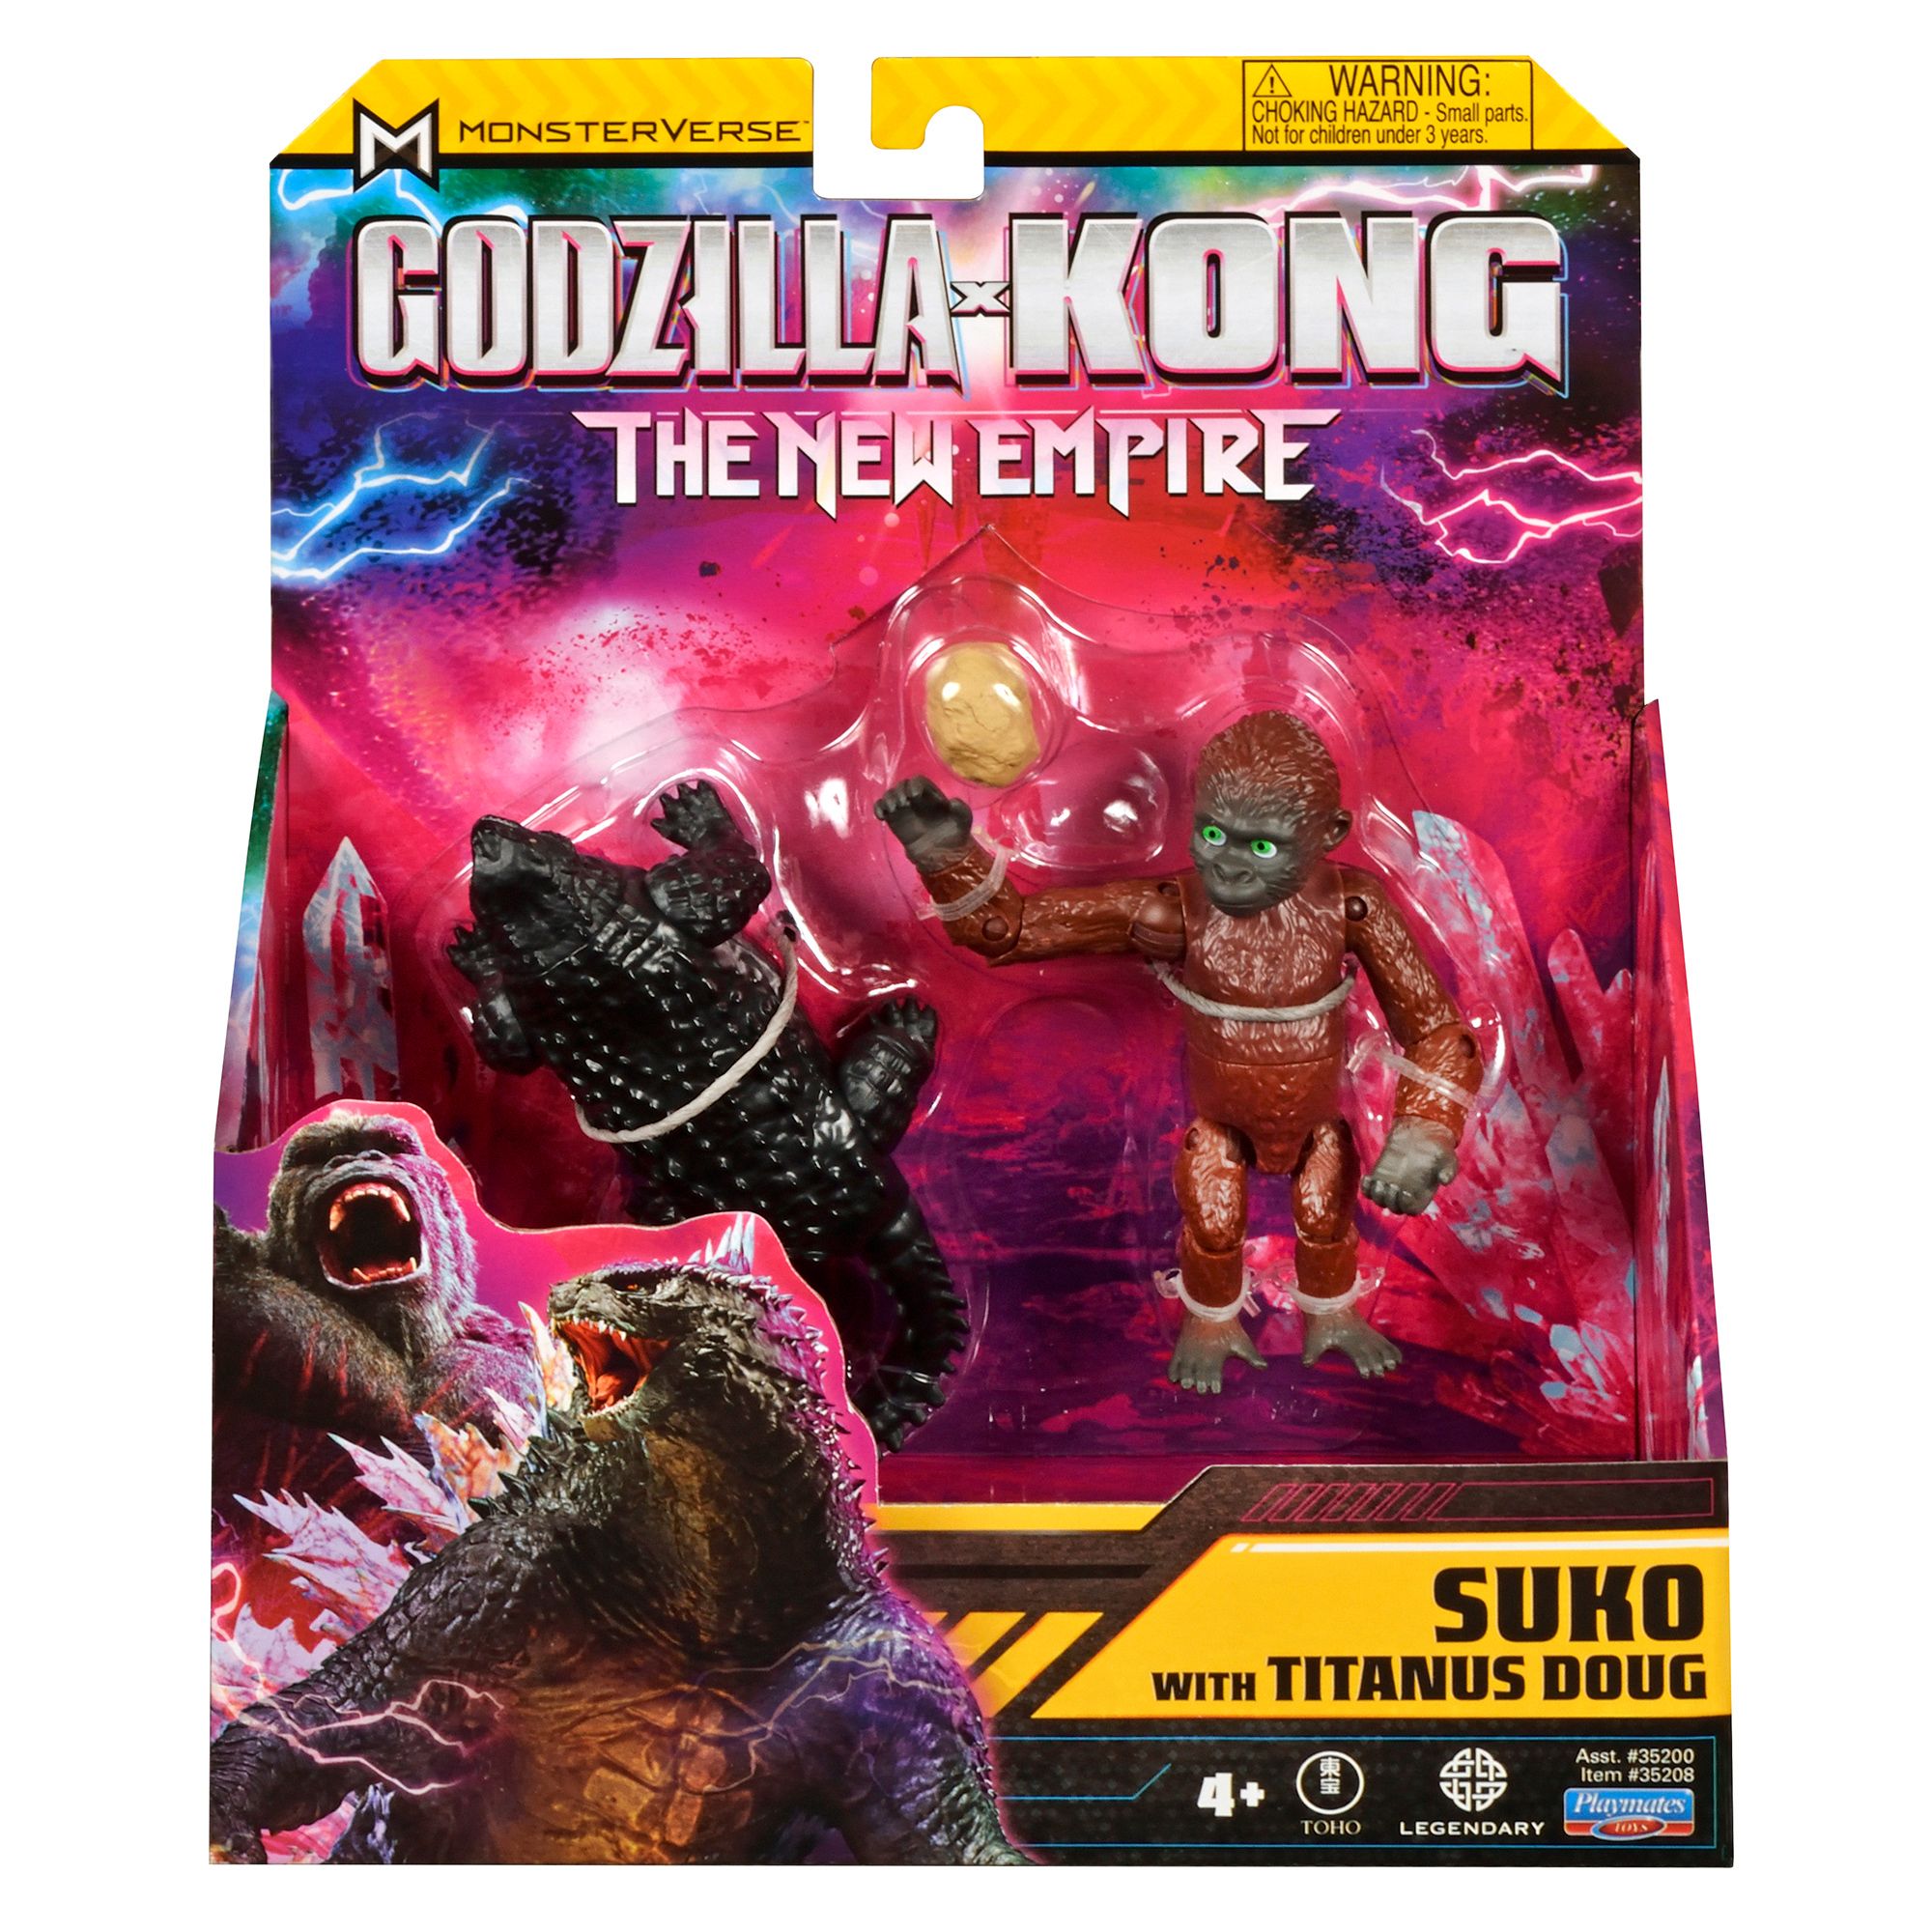 Kaiju News Outlet on X: New @PlaymatesToys Godzilla x Kong: The New  Empire 6 figures are now arriving at retailers. Each figure pack costs  $9.99 and will be available from Walmart, 